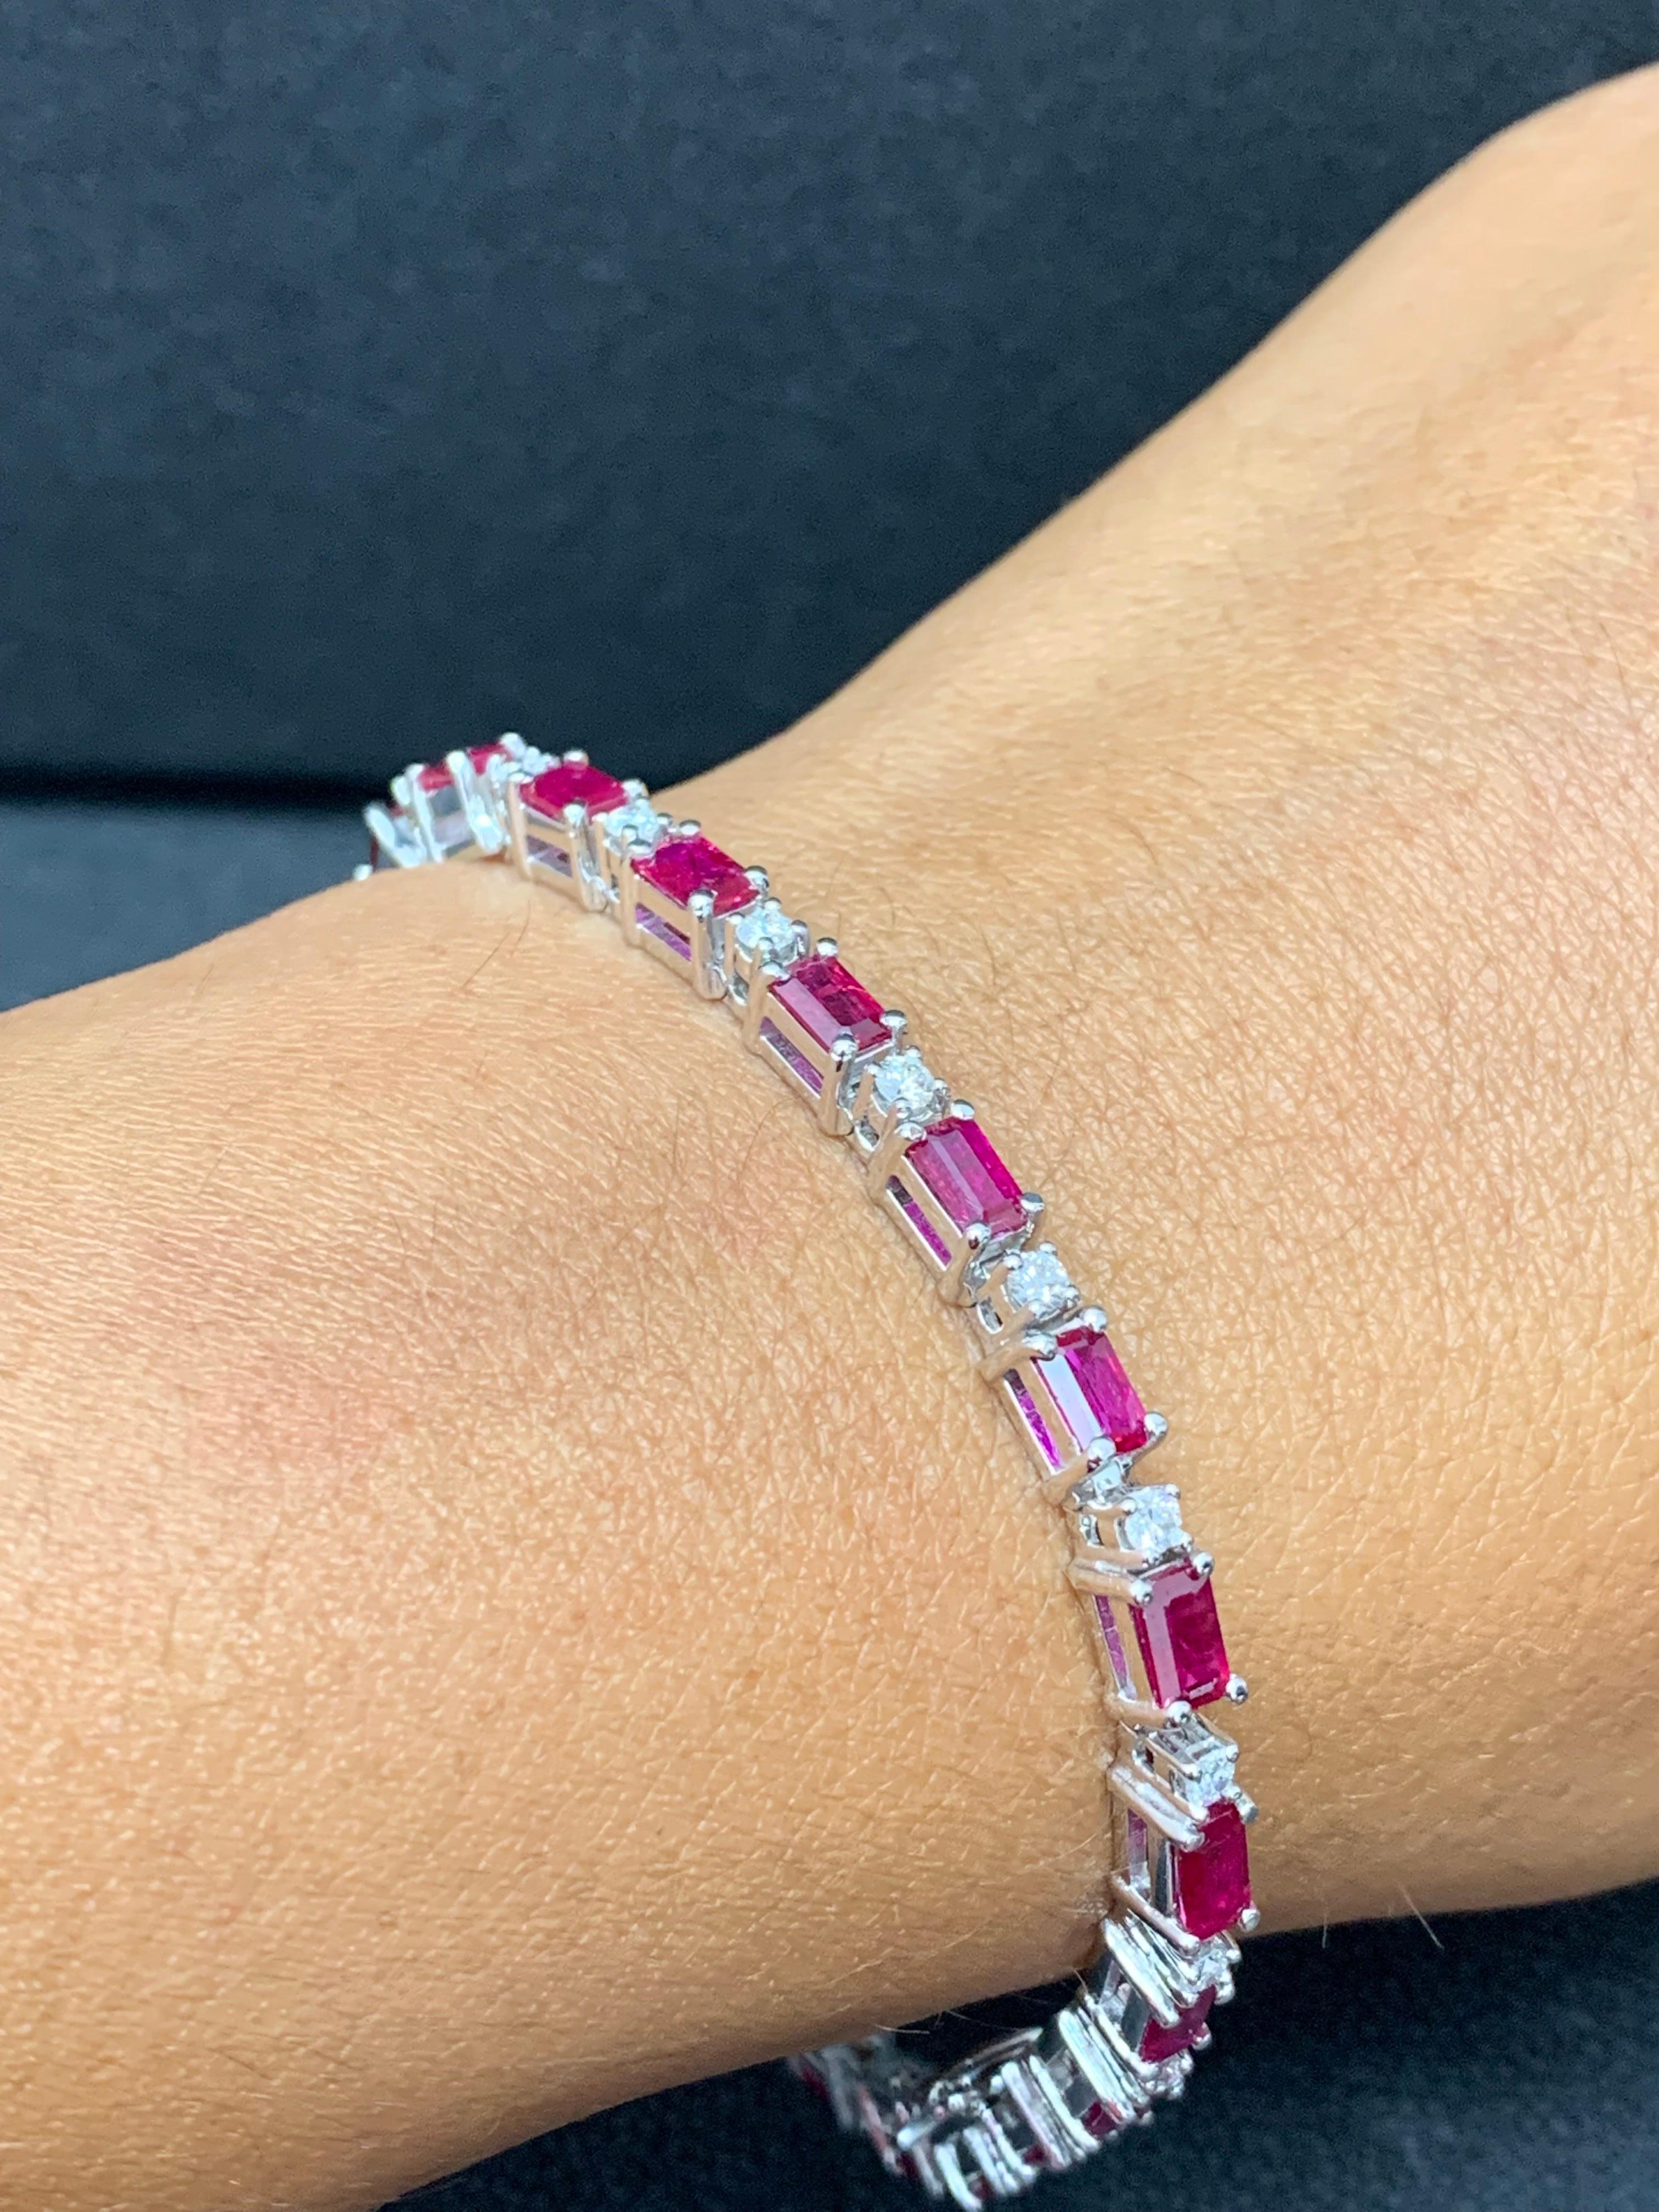 6.12 Carat Emerald Cut Ruby and Diamond Bracelet in 14K White Gold For Sale 8